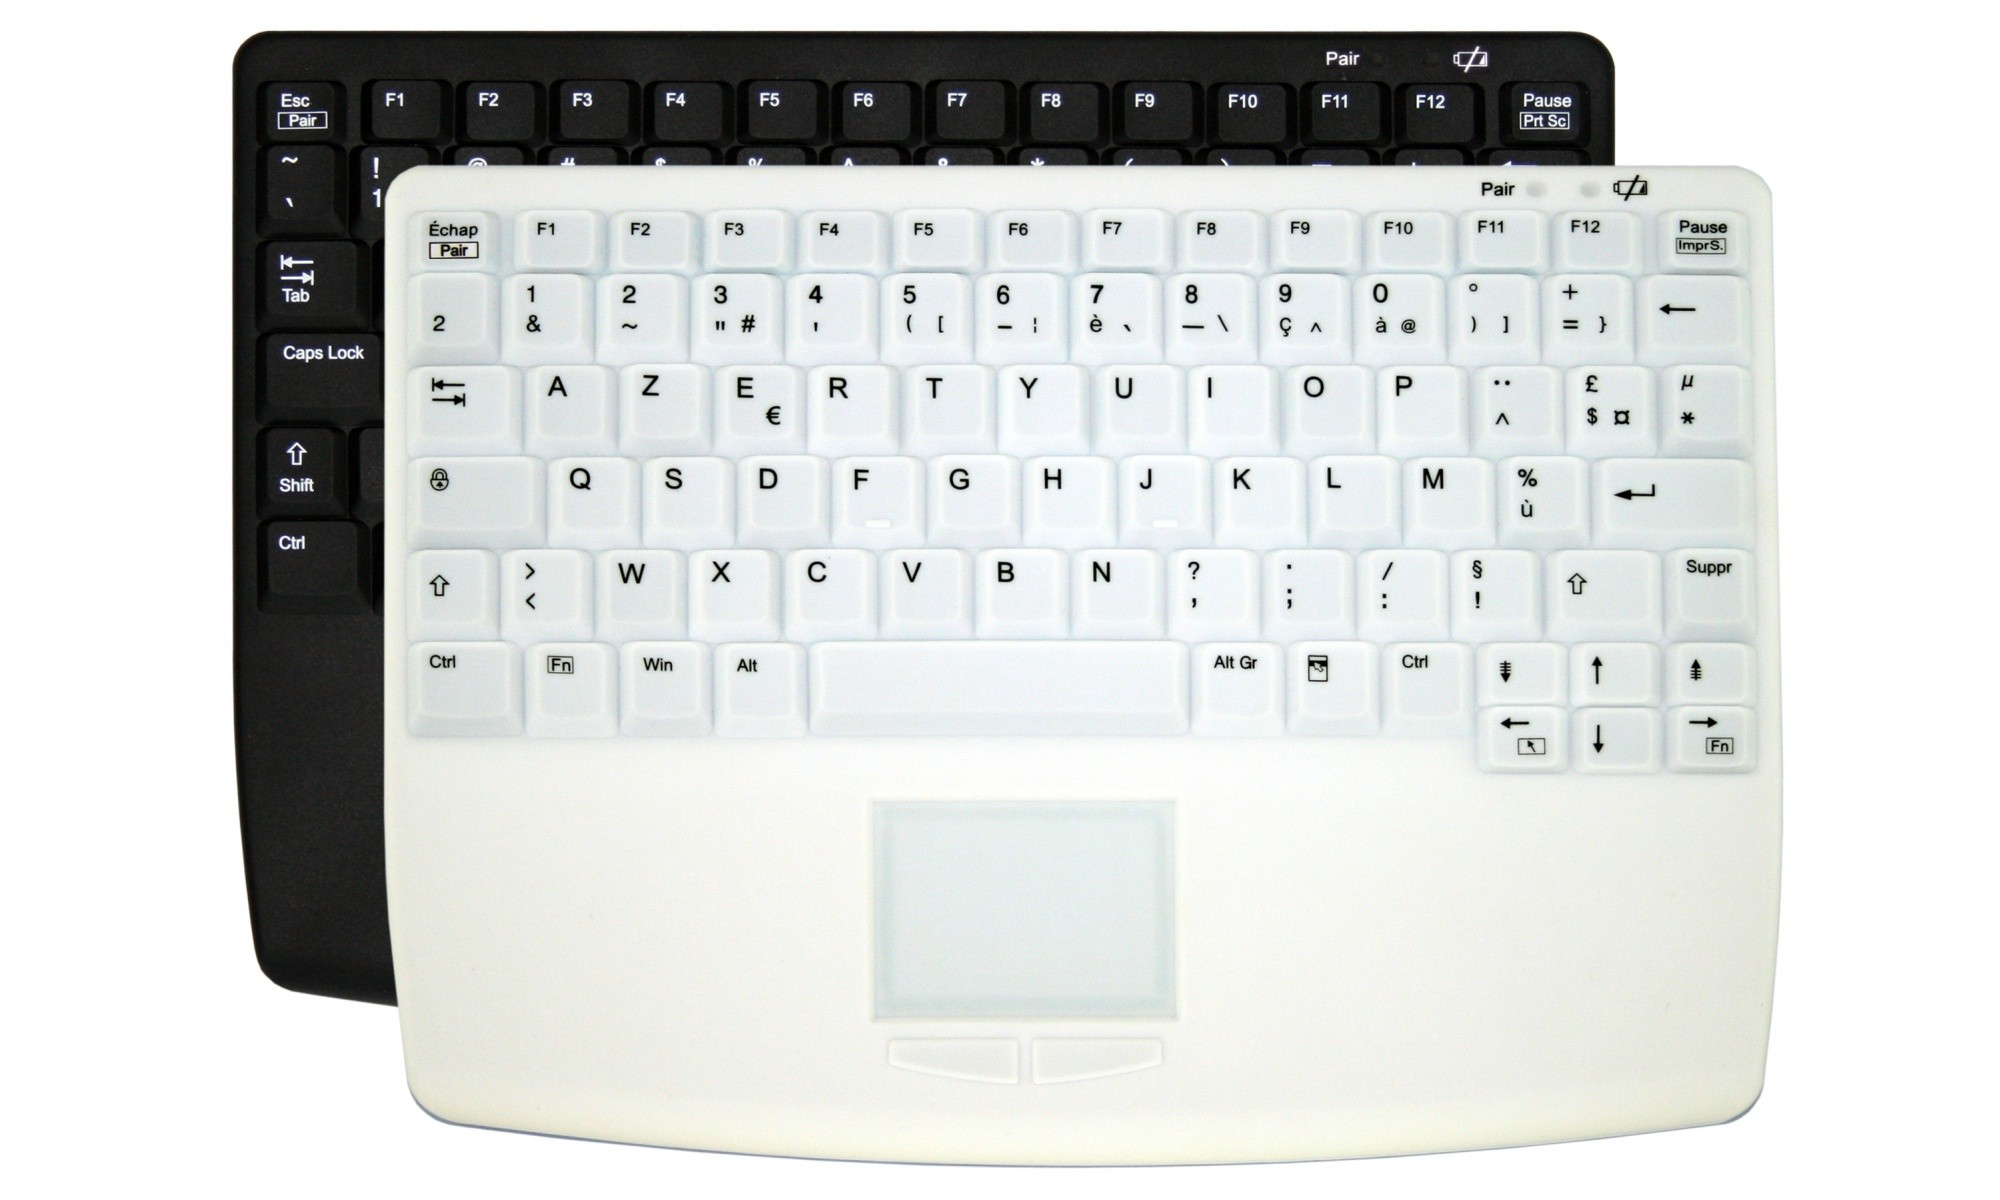 Sanitizable 83Key Touchpad Keyboard with Clean Function, Fully Sealed, USB, White, German layout